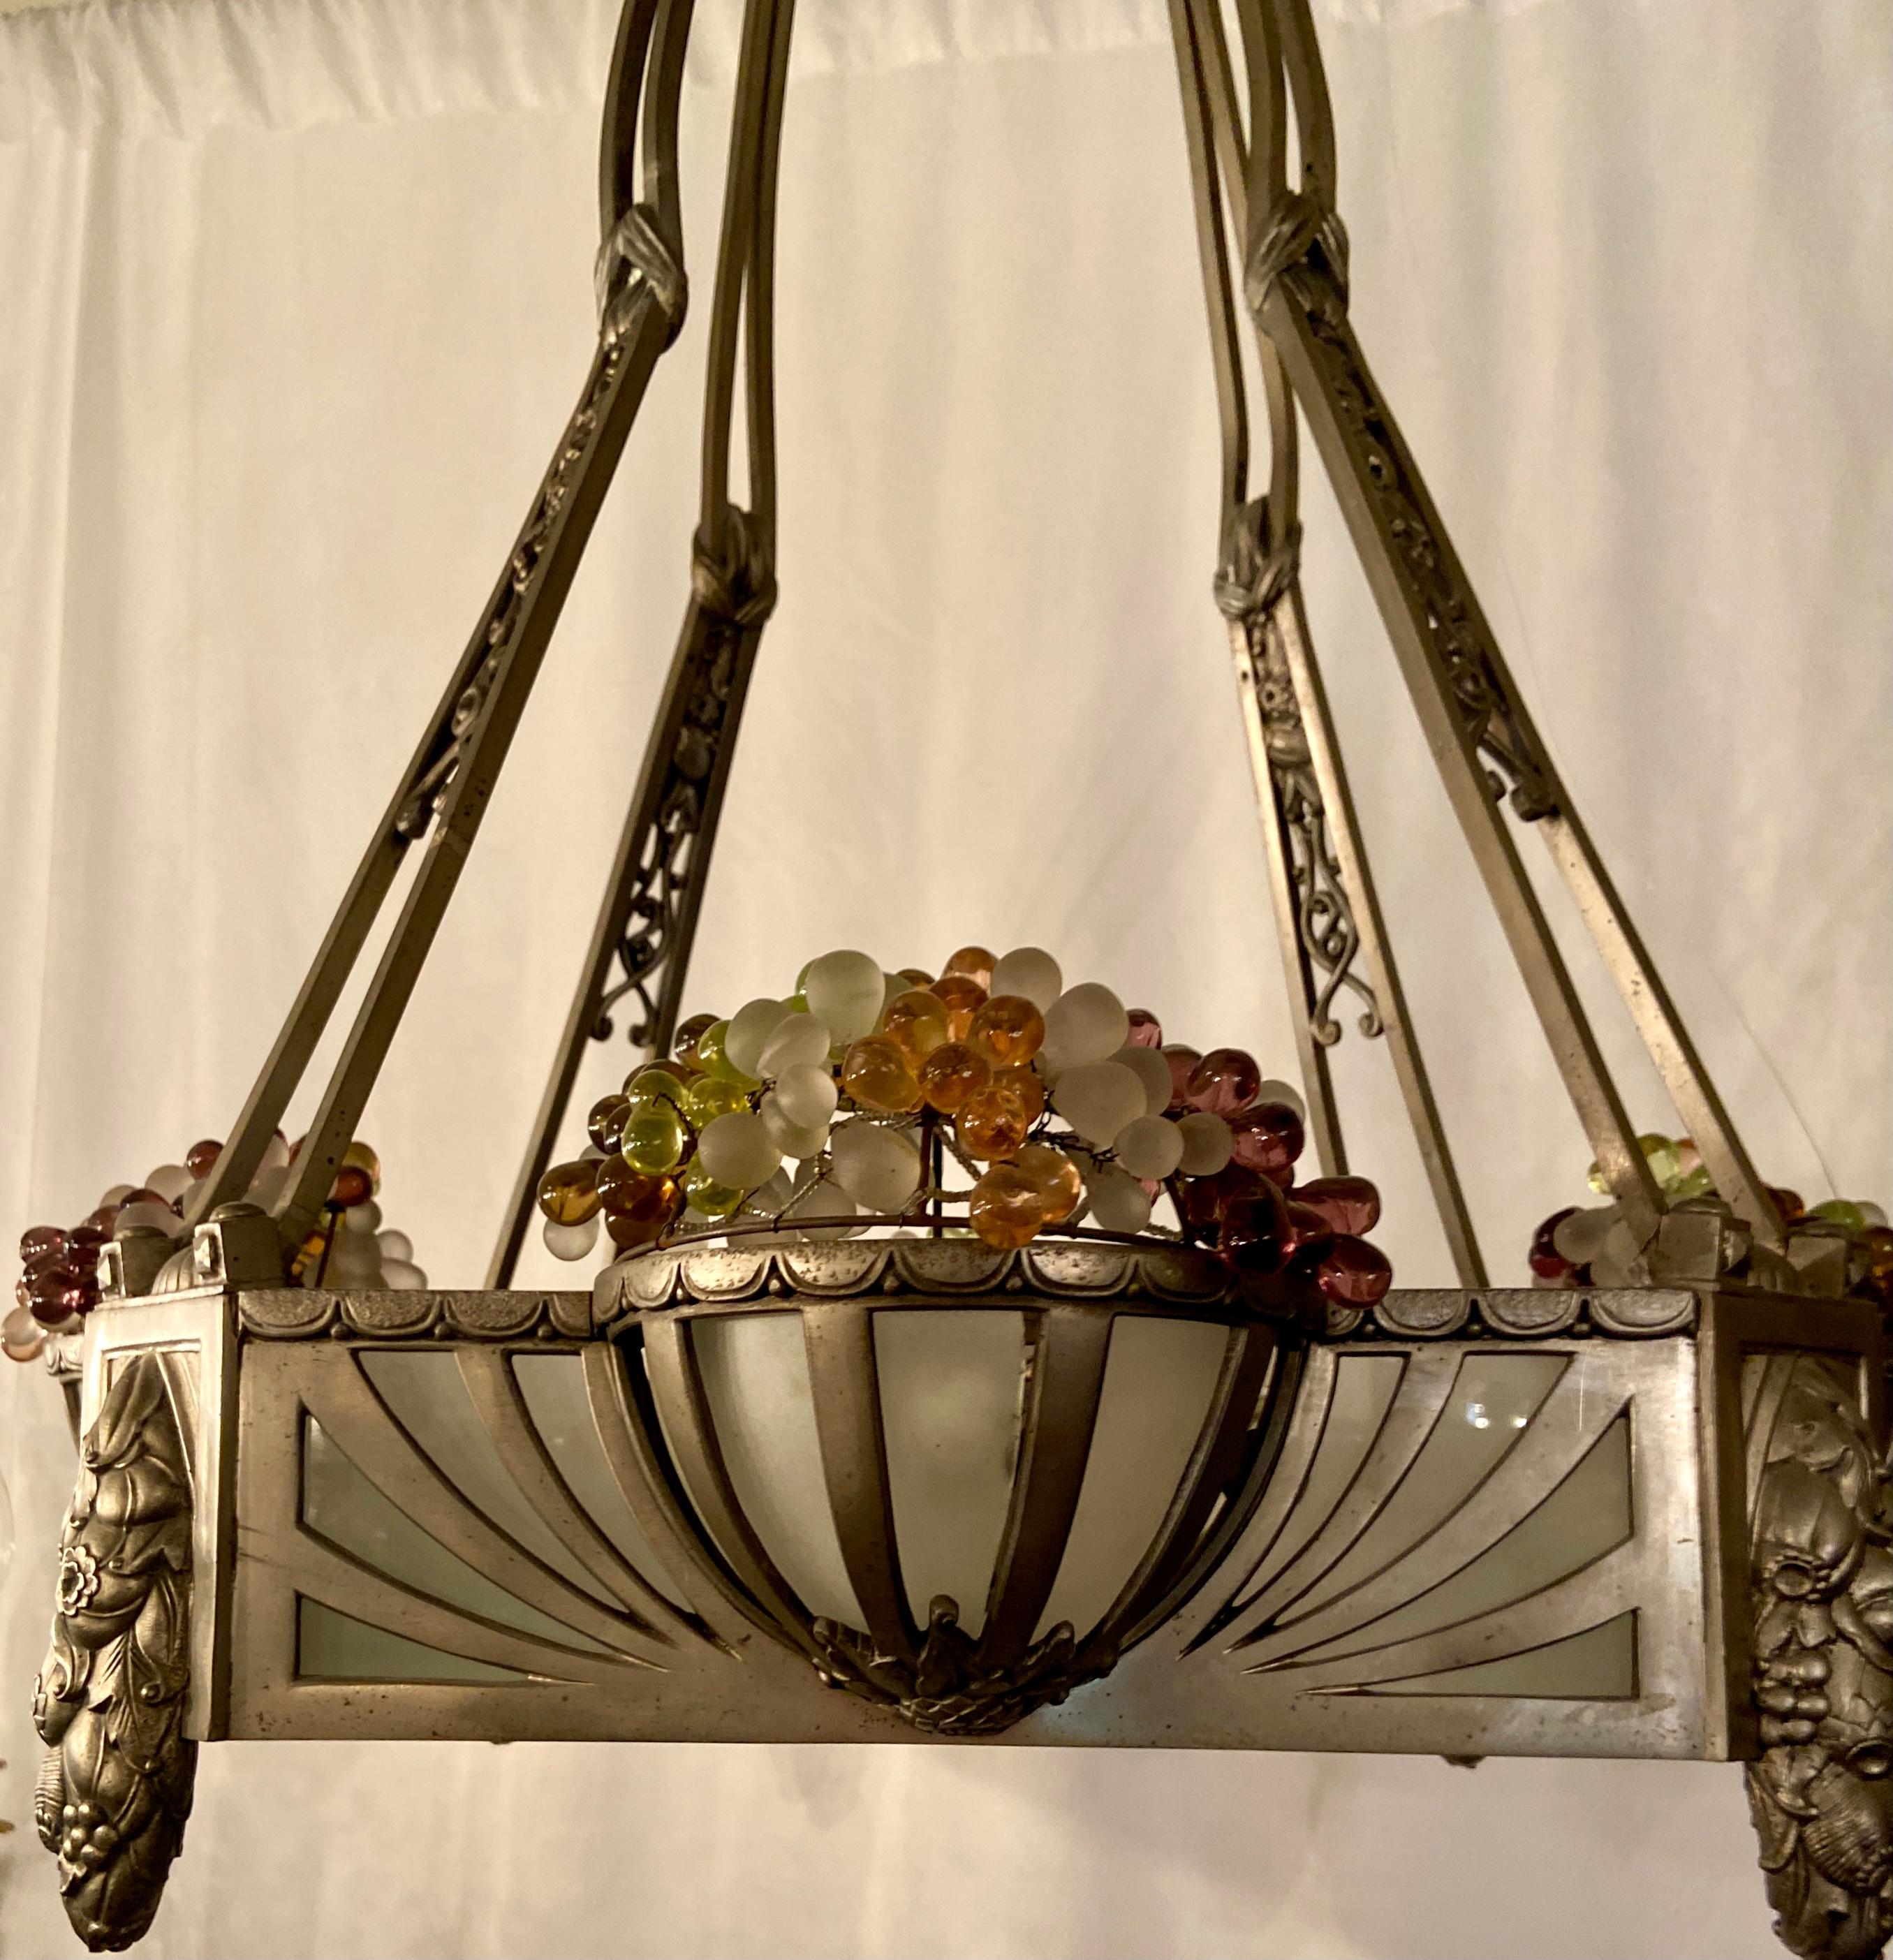 Antique French Art Deco silvered bronze & frosted glass chandelier with grape clusters, Circa 1920.